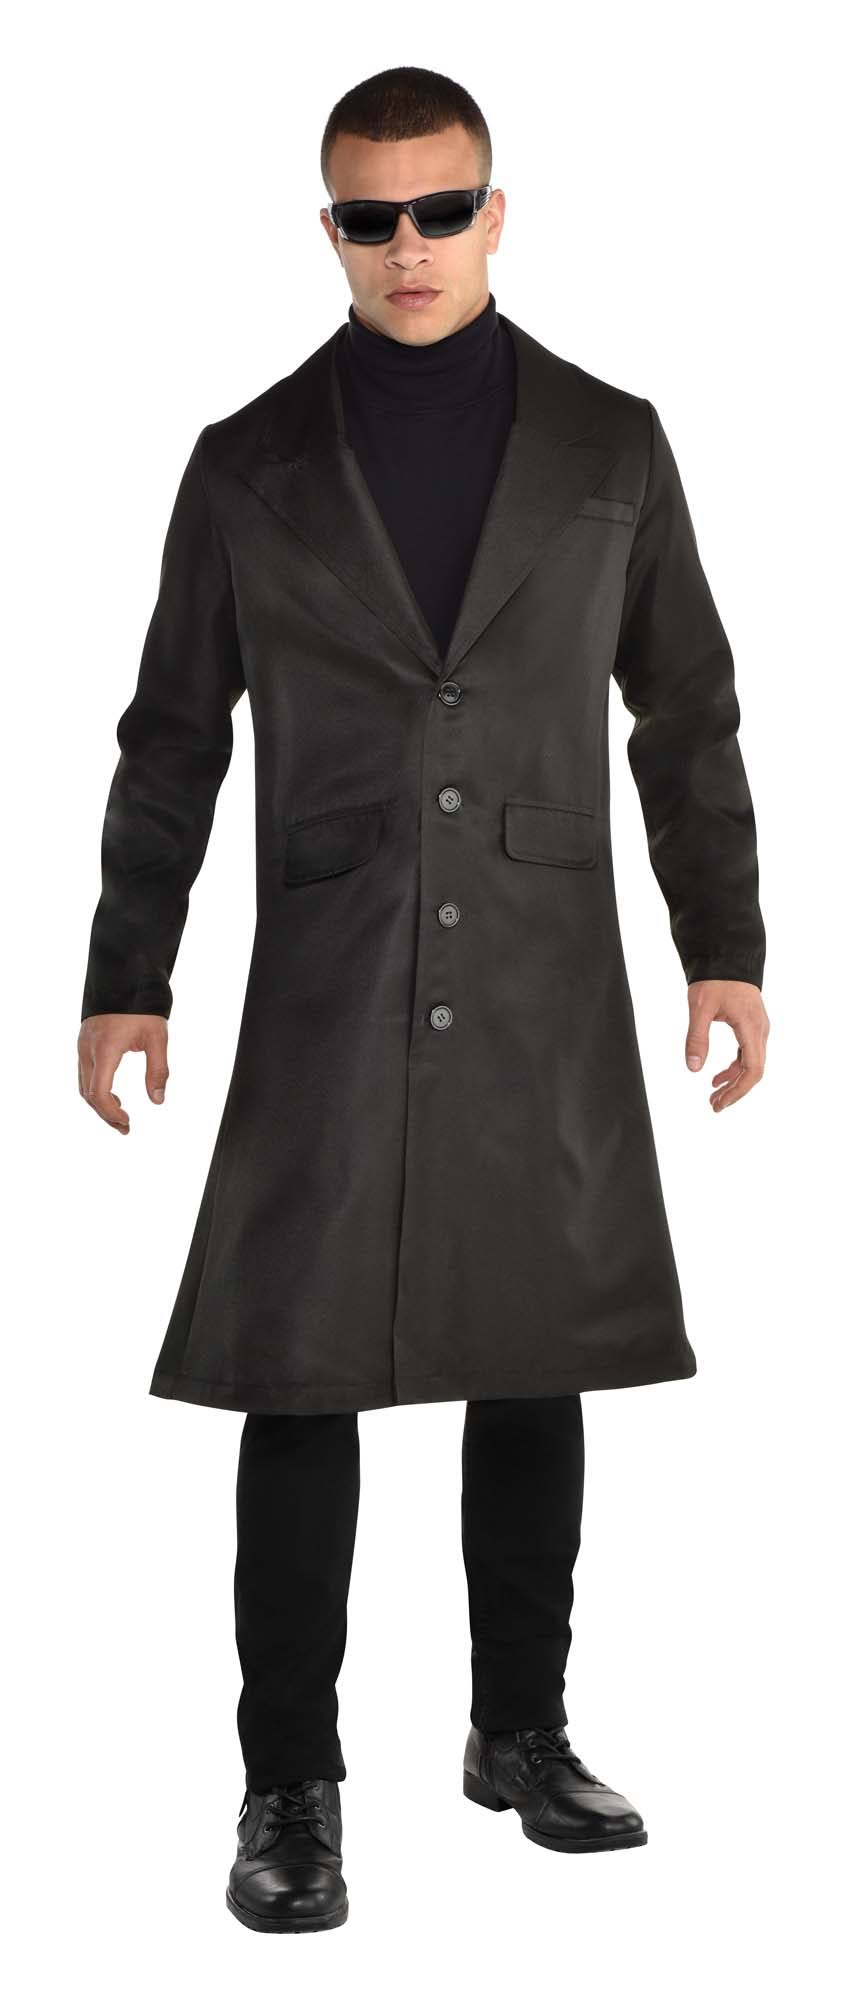 Adult Black Trench Coat - Size - Standard Size